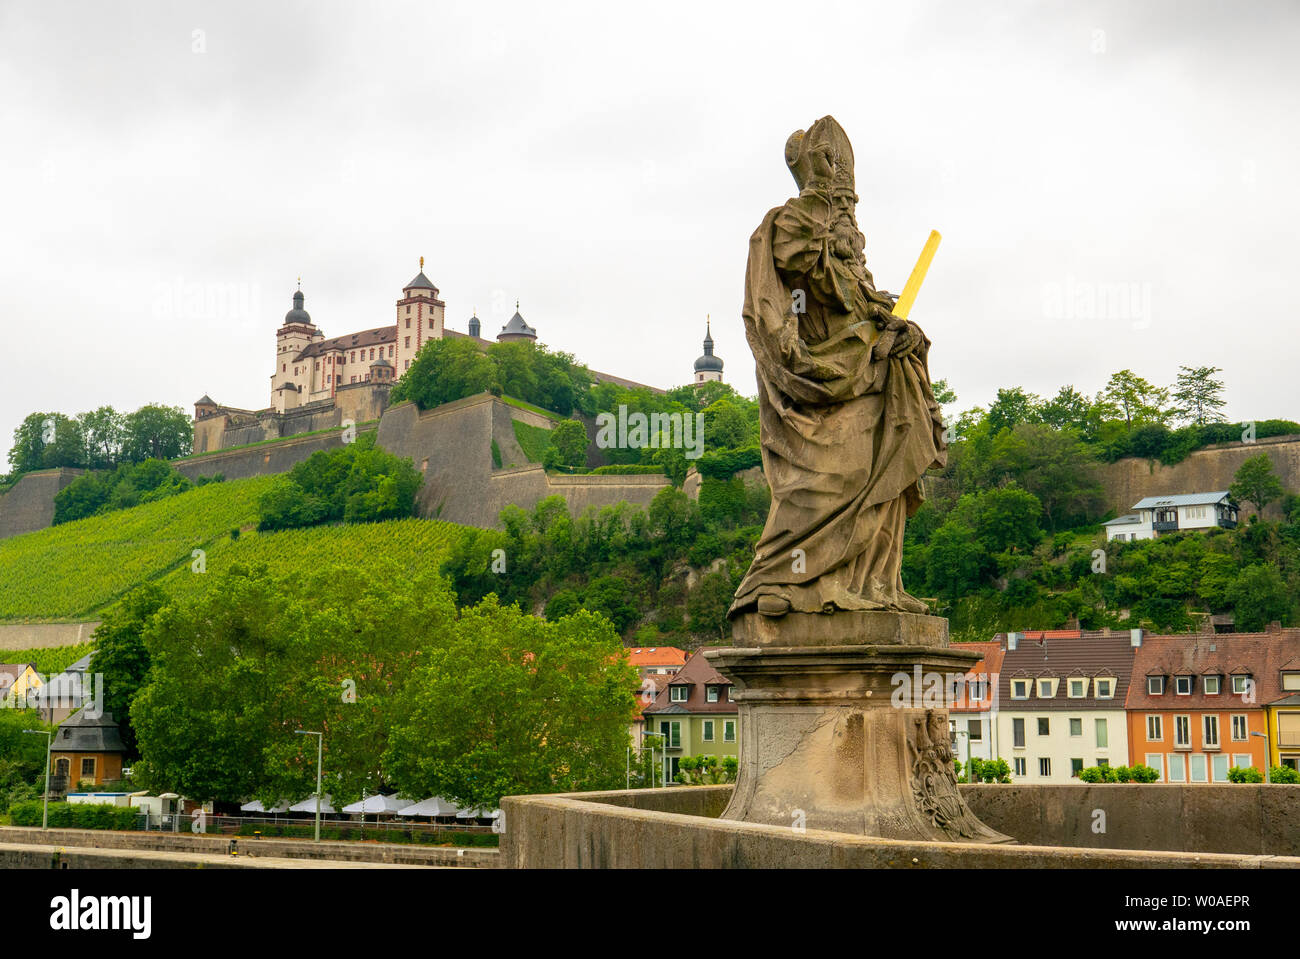 WURZBURG, GERMANY - JUNE 12, 2019: The statue of St Kilian in a the alte Mainbrucke, the old bridge across the Main river in Wurzburg - Bavaria, Germa Stock Photo